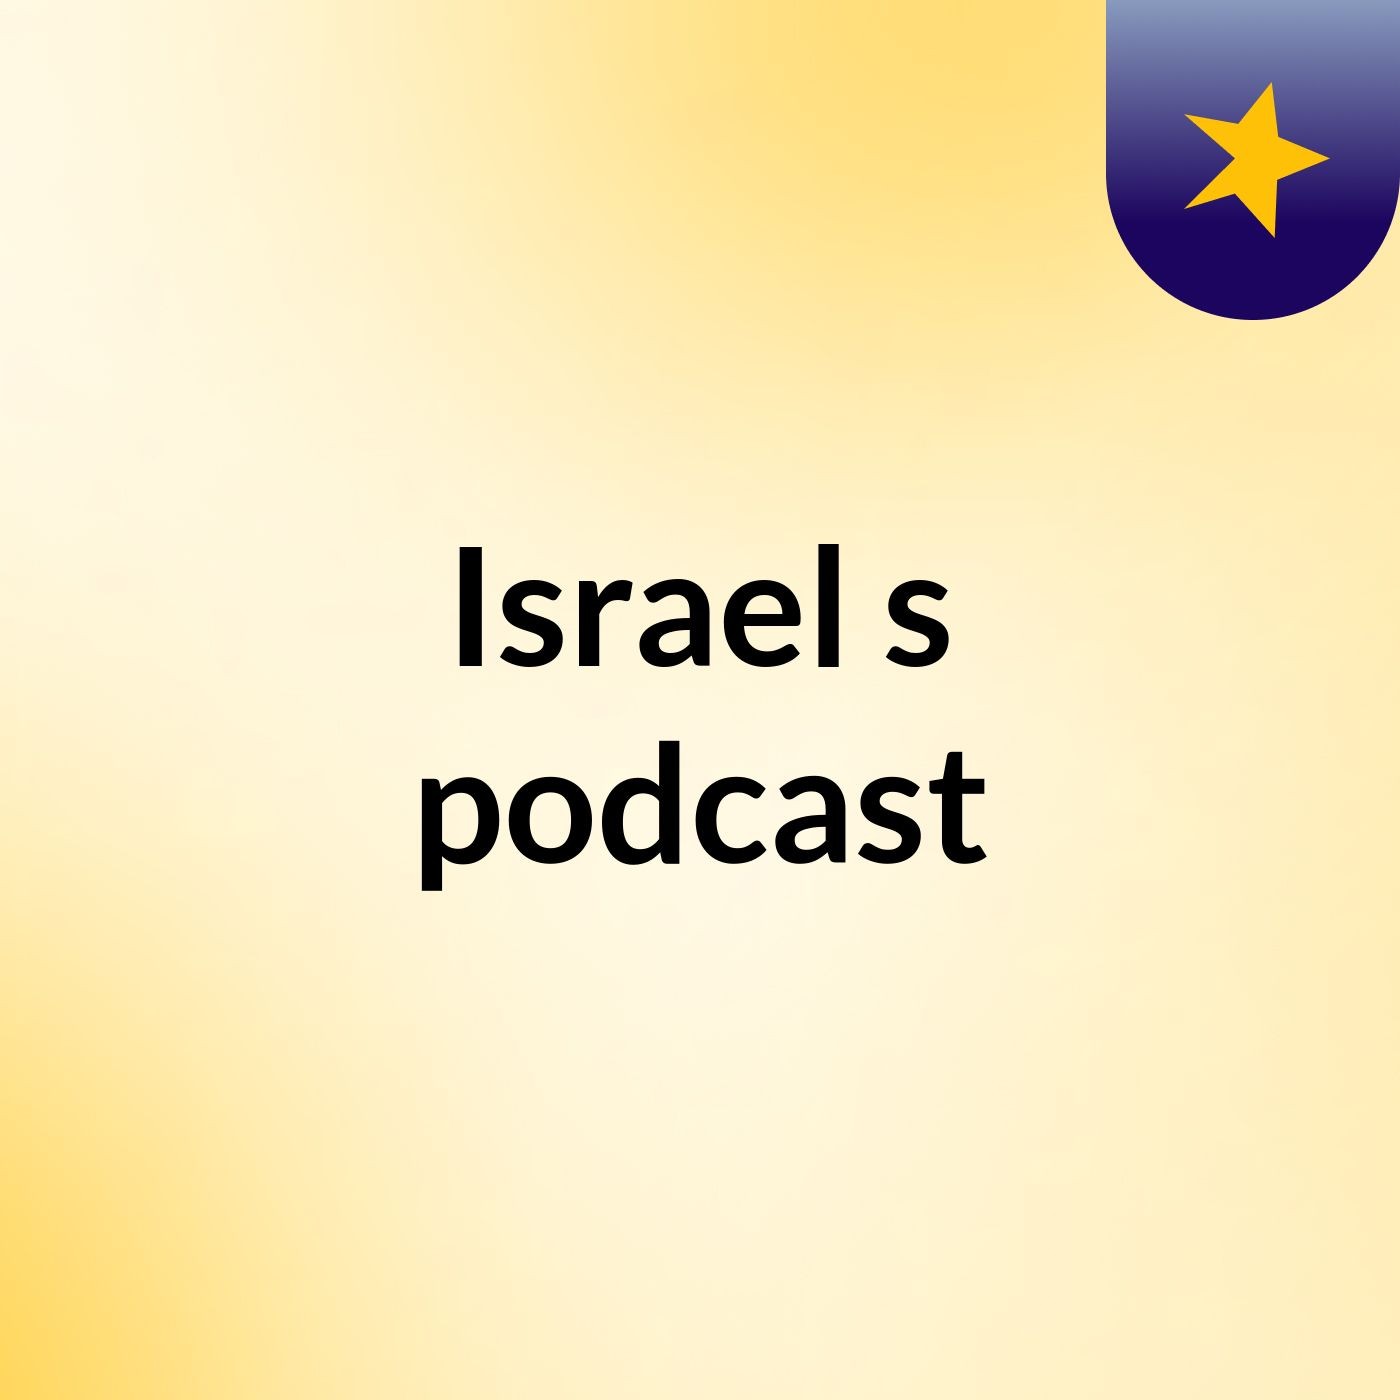 Israel's podcast